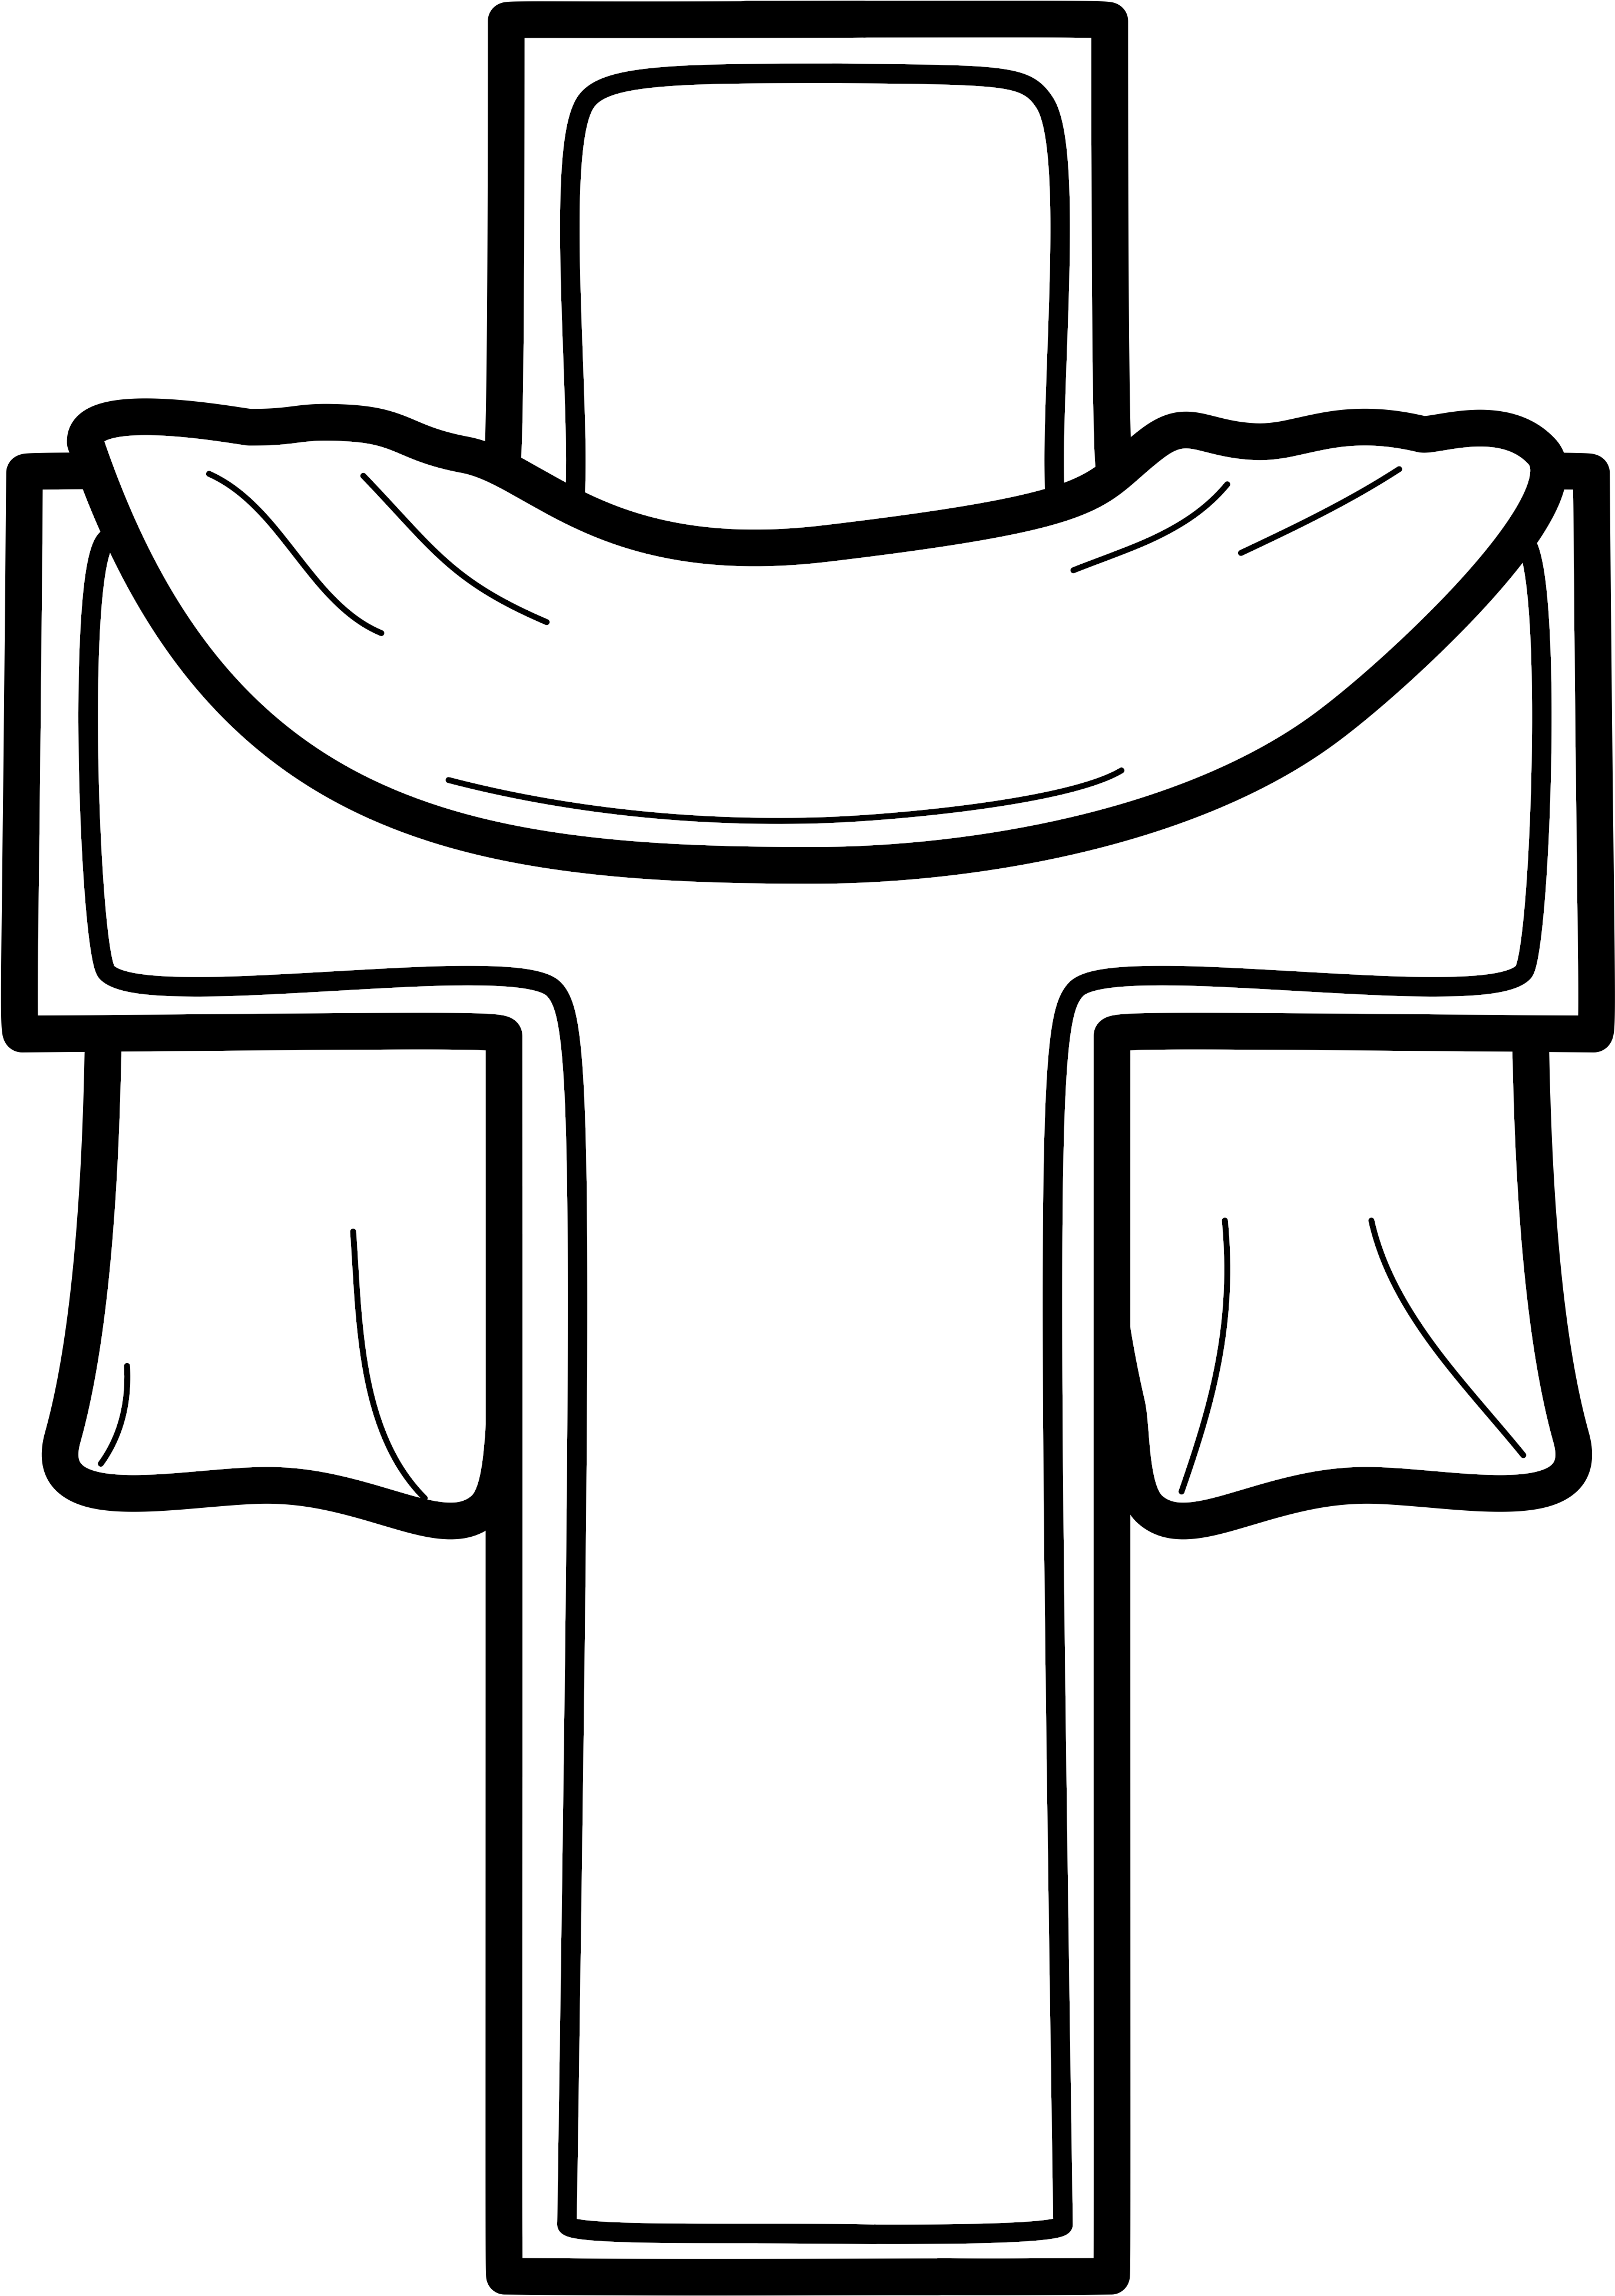 Black And White Coloring Page Of Jesus' Cross Draped - Black And White Coloring Page Of Jesus' Cross Draped (2834x4000)